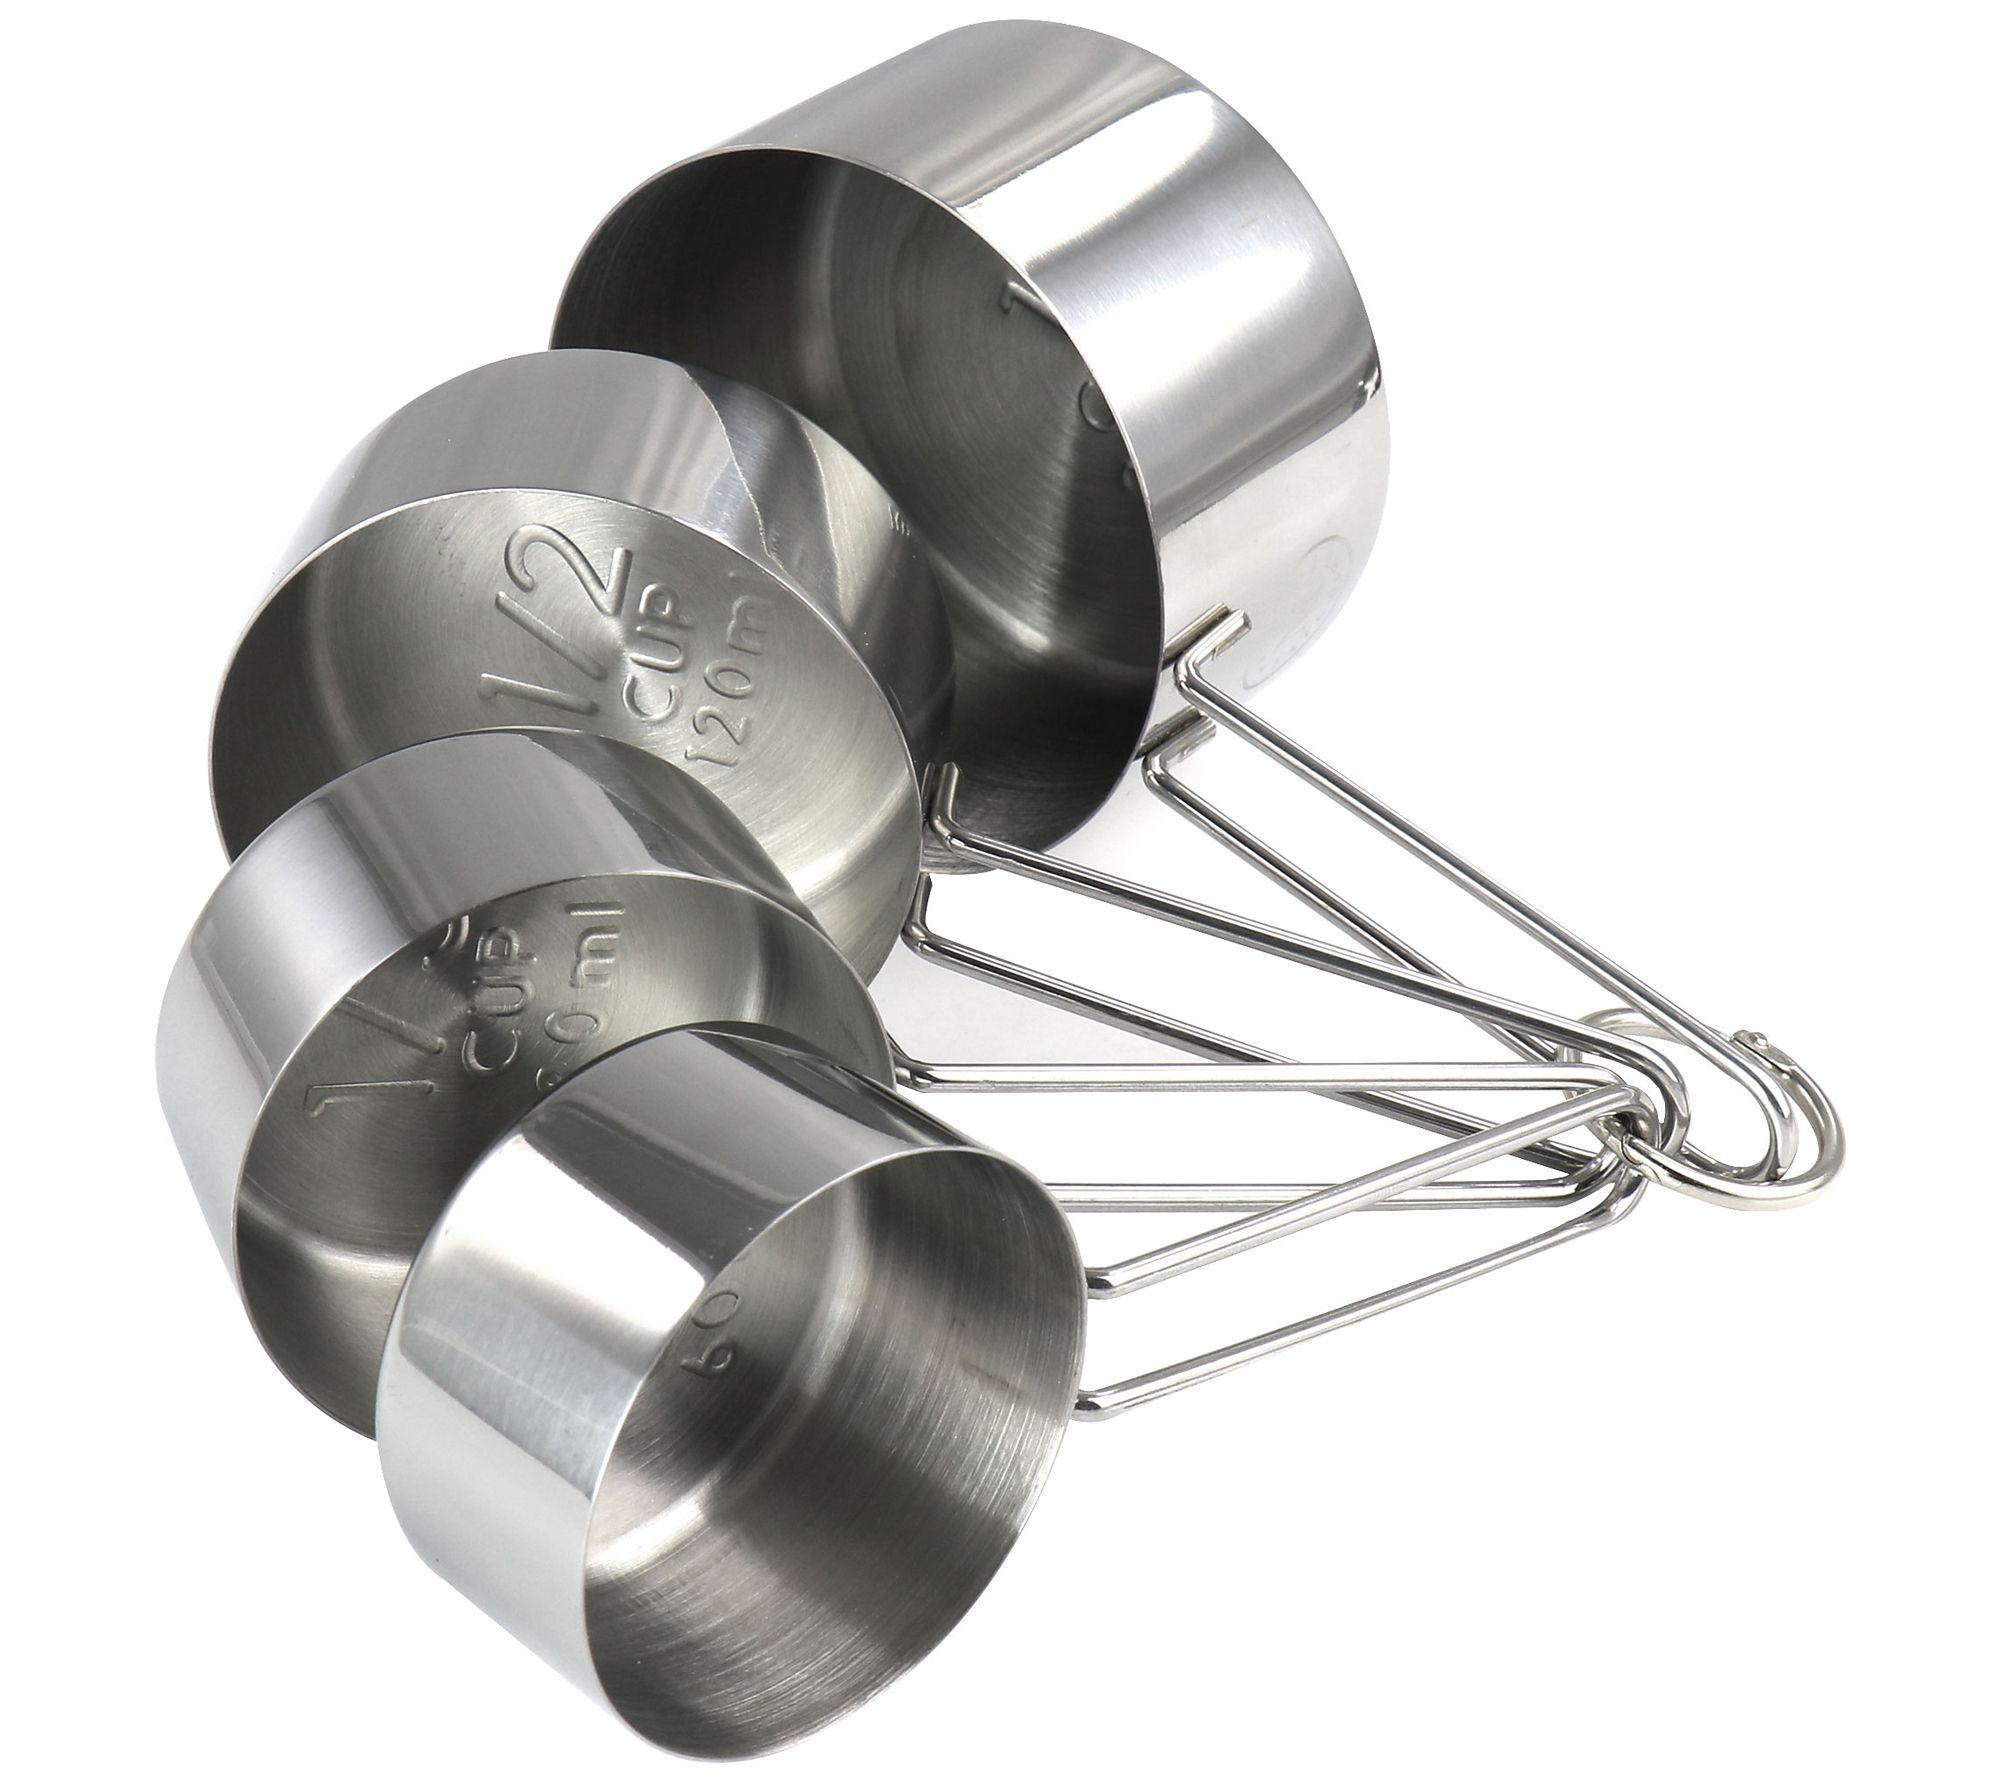 BergHOFF 4Pc Stainless Steel Measuring Cup Set